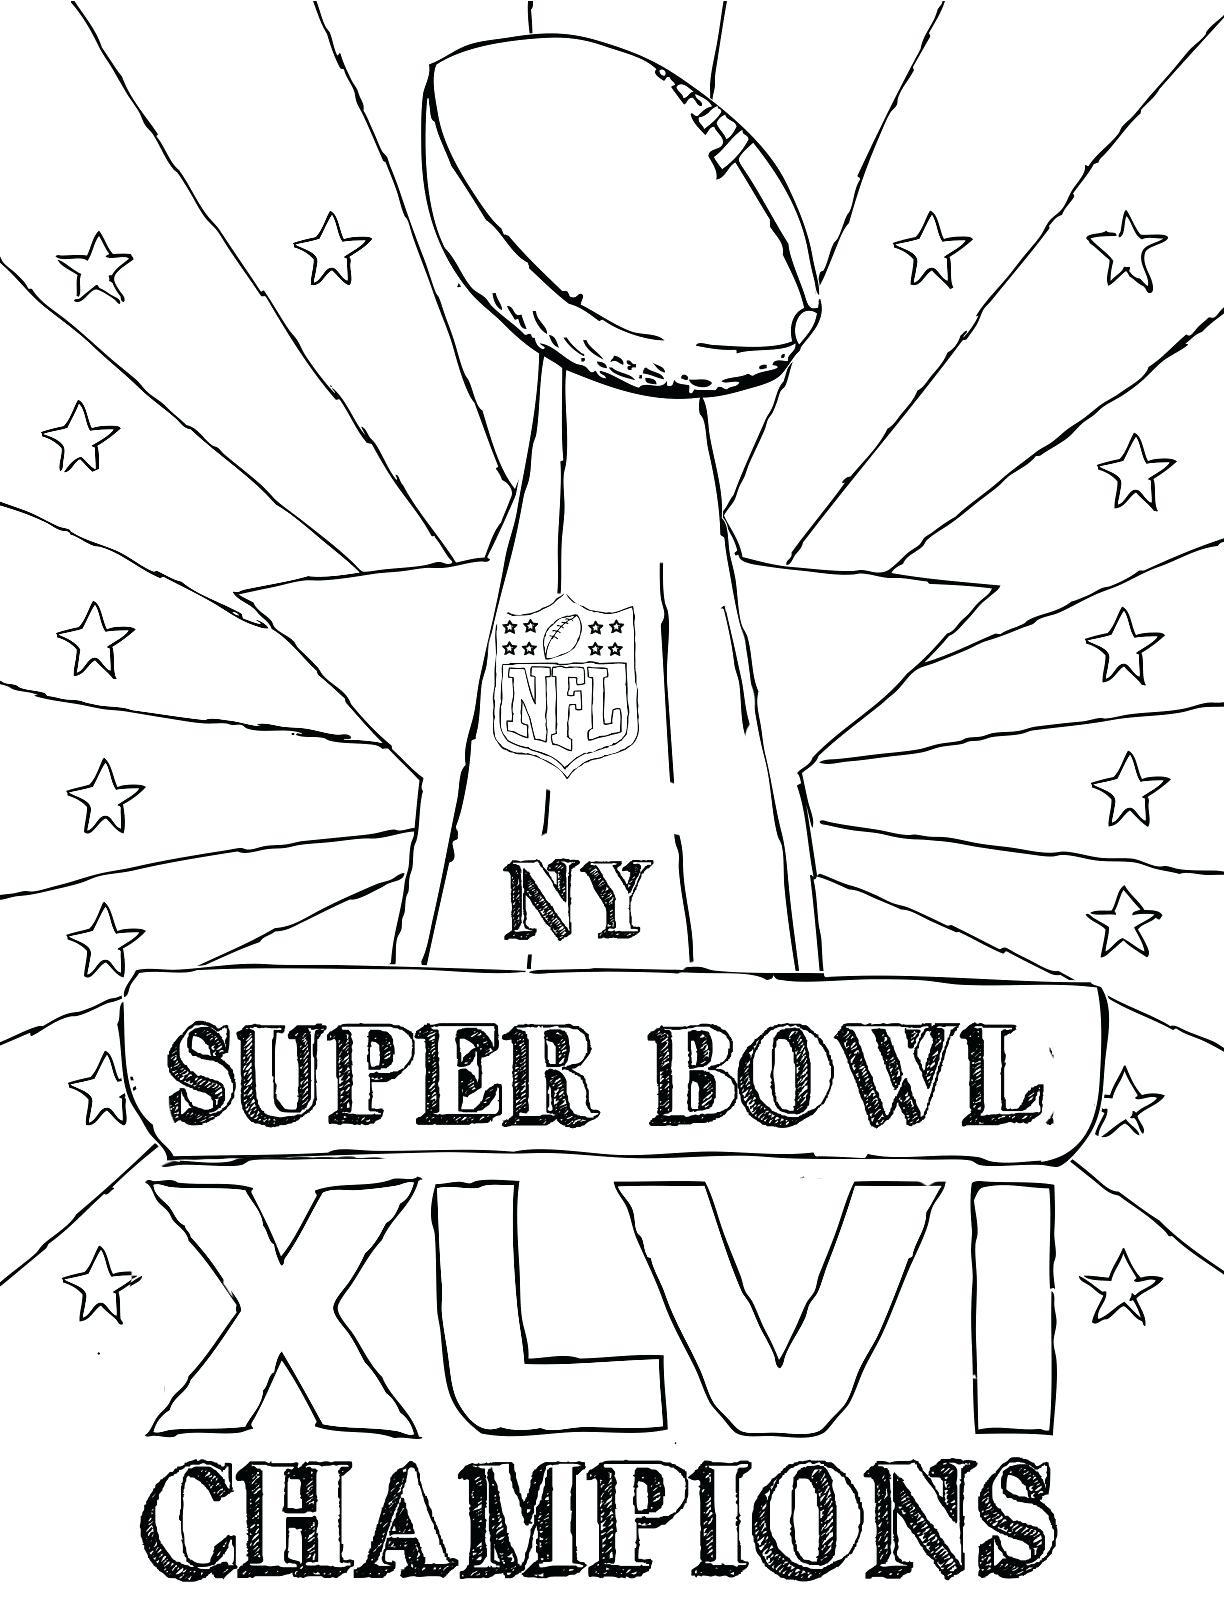 Super Bowl Coloring Pages Free Nfl Coloring Books Turnkeyprintco